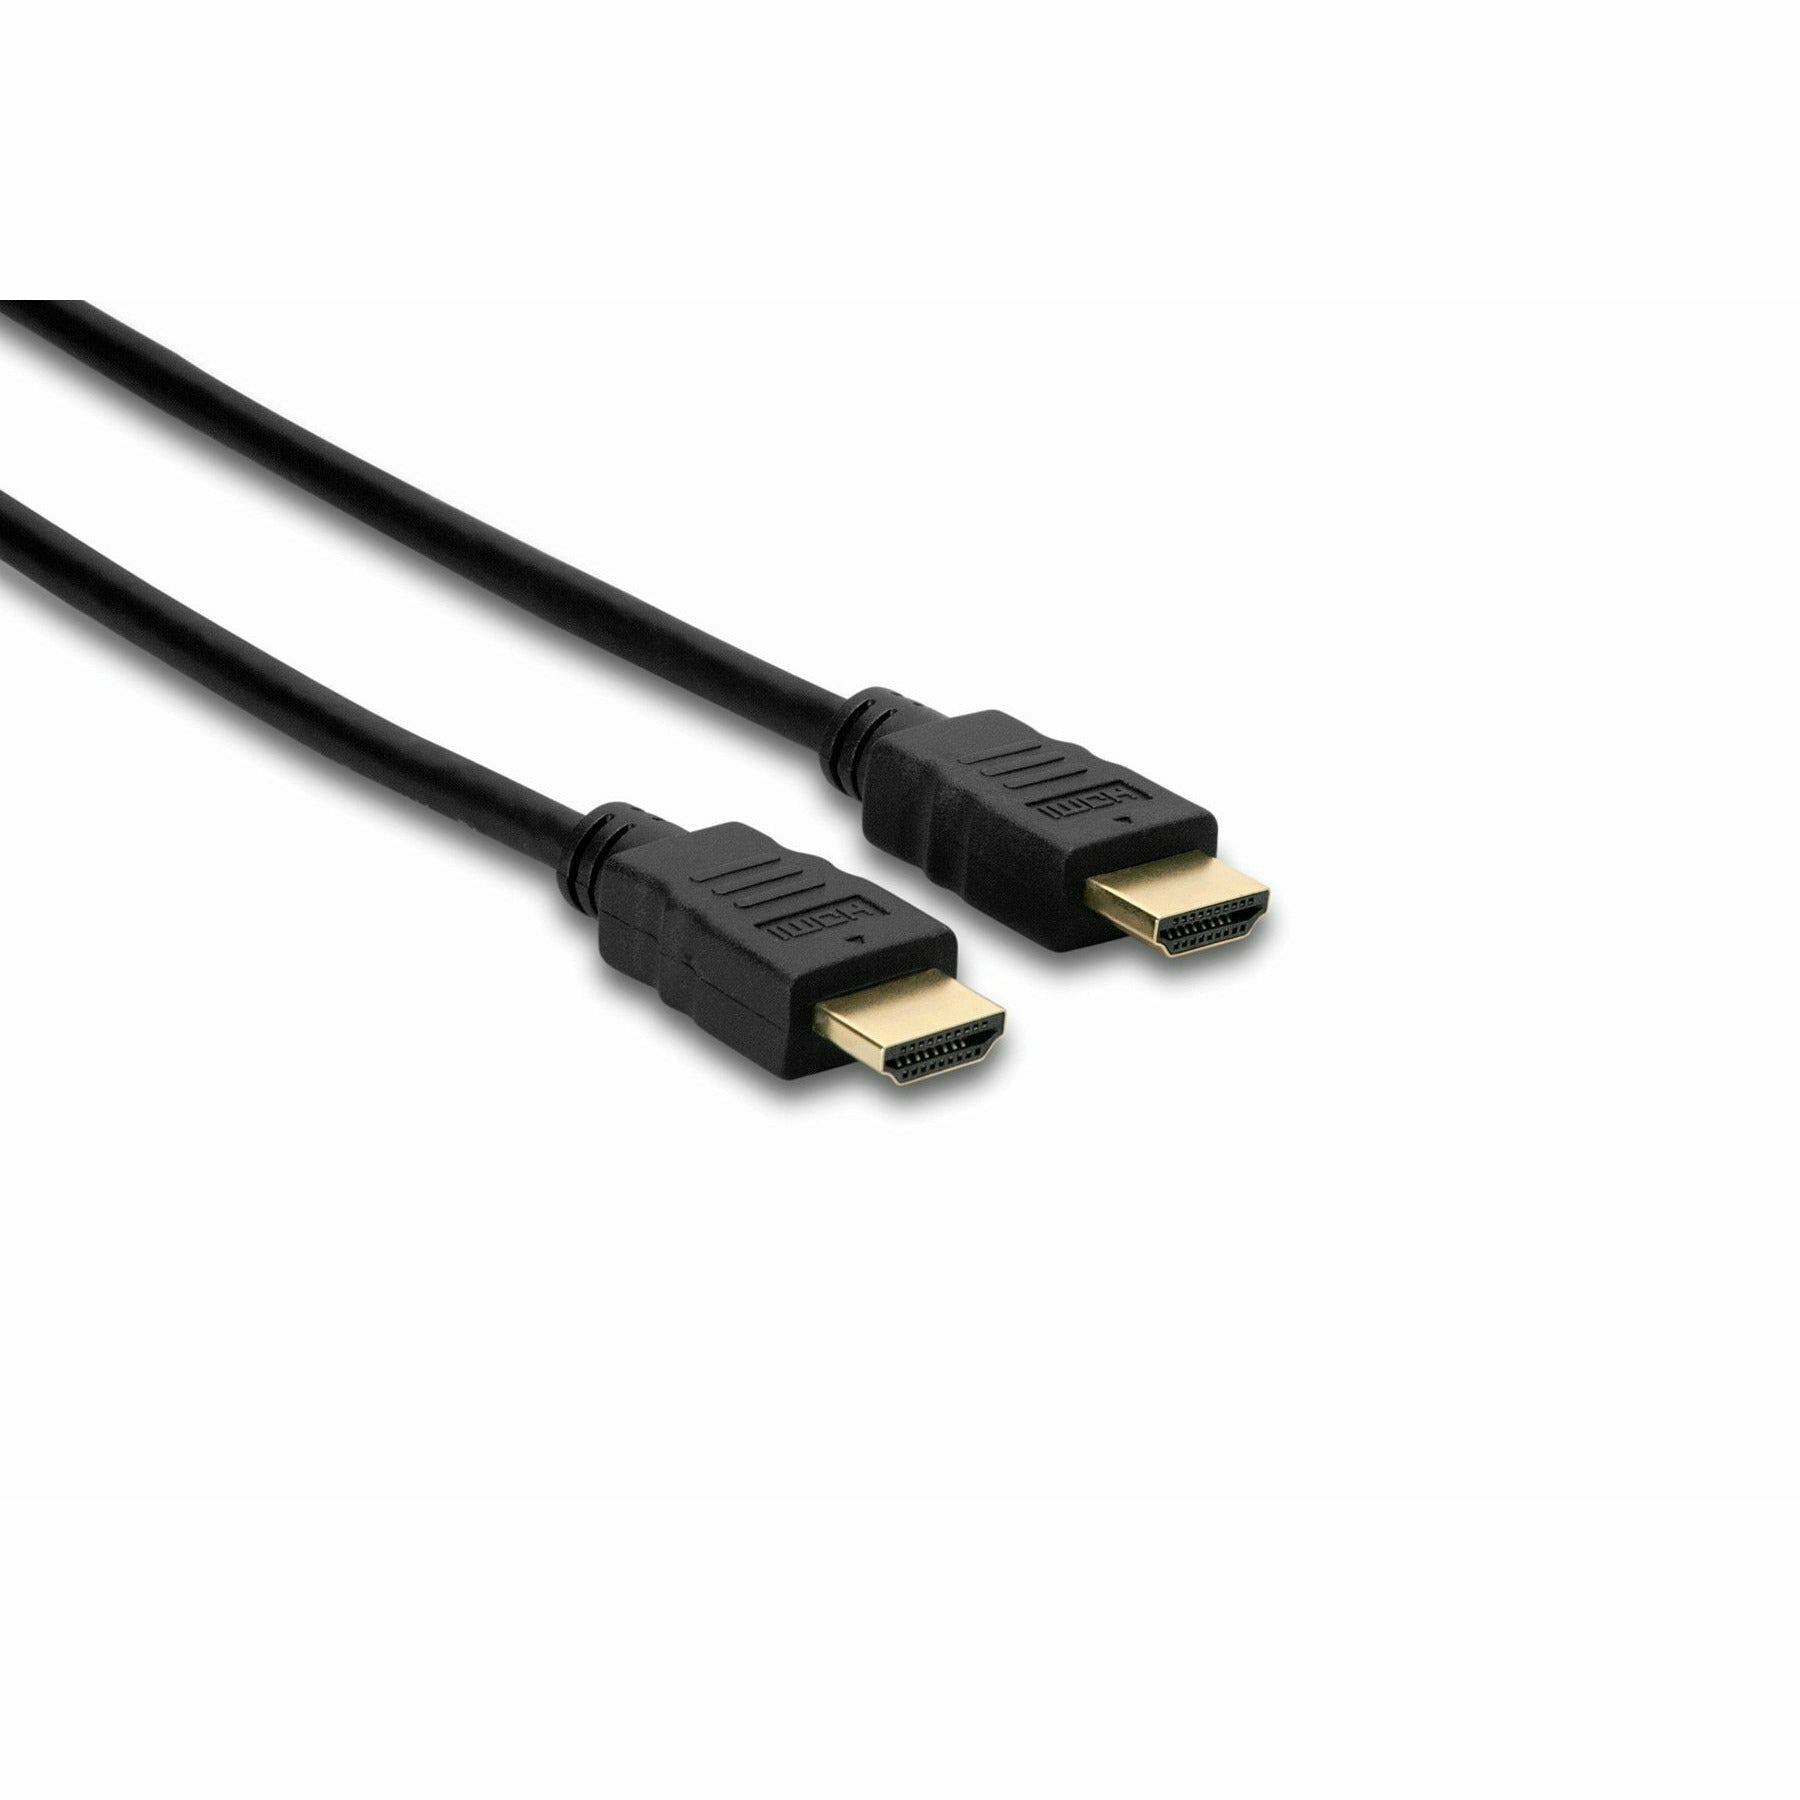 Hosa High Speed HDMI Cable with Ethernet, HDMI to HDMI, 15 ft - Dragon Image